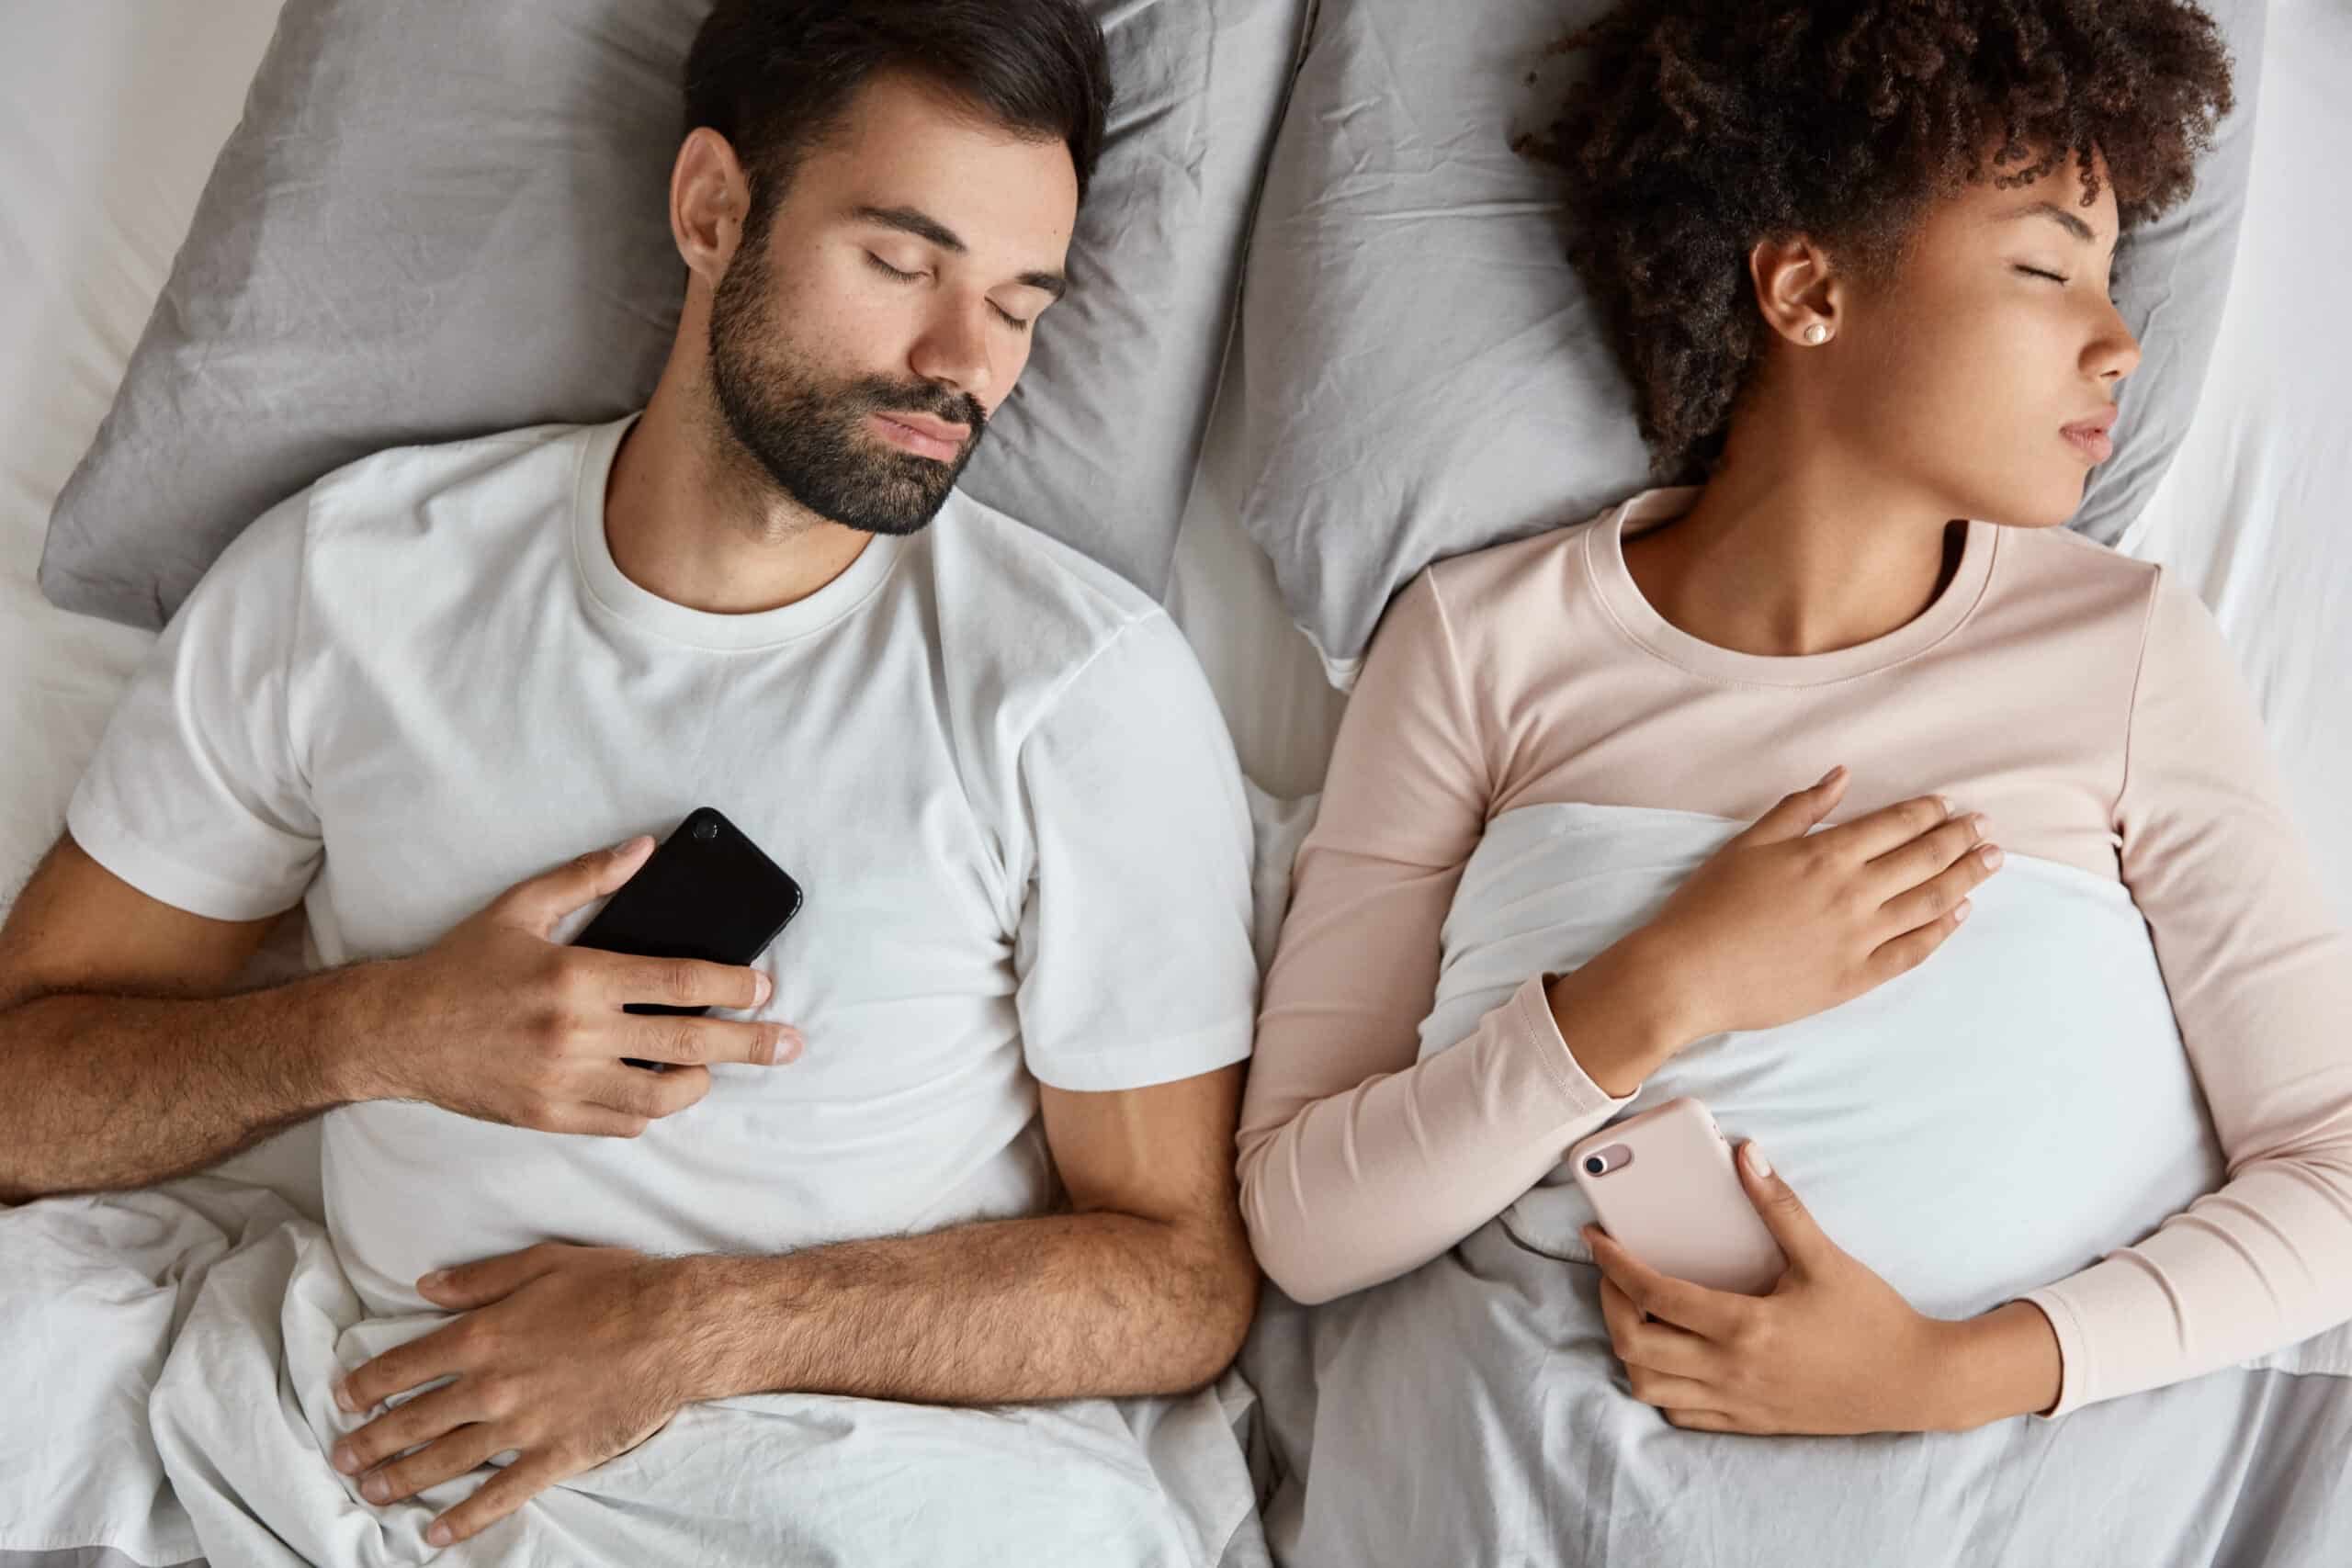 Top view of tech-addicted mixed race couple sleeping with their cell phones, modern electronic gadgets in hand.